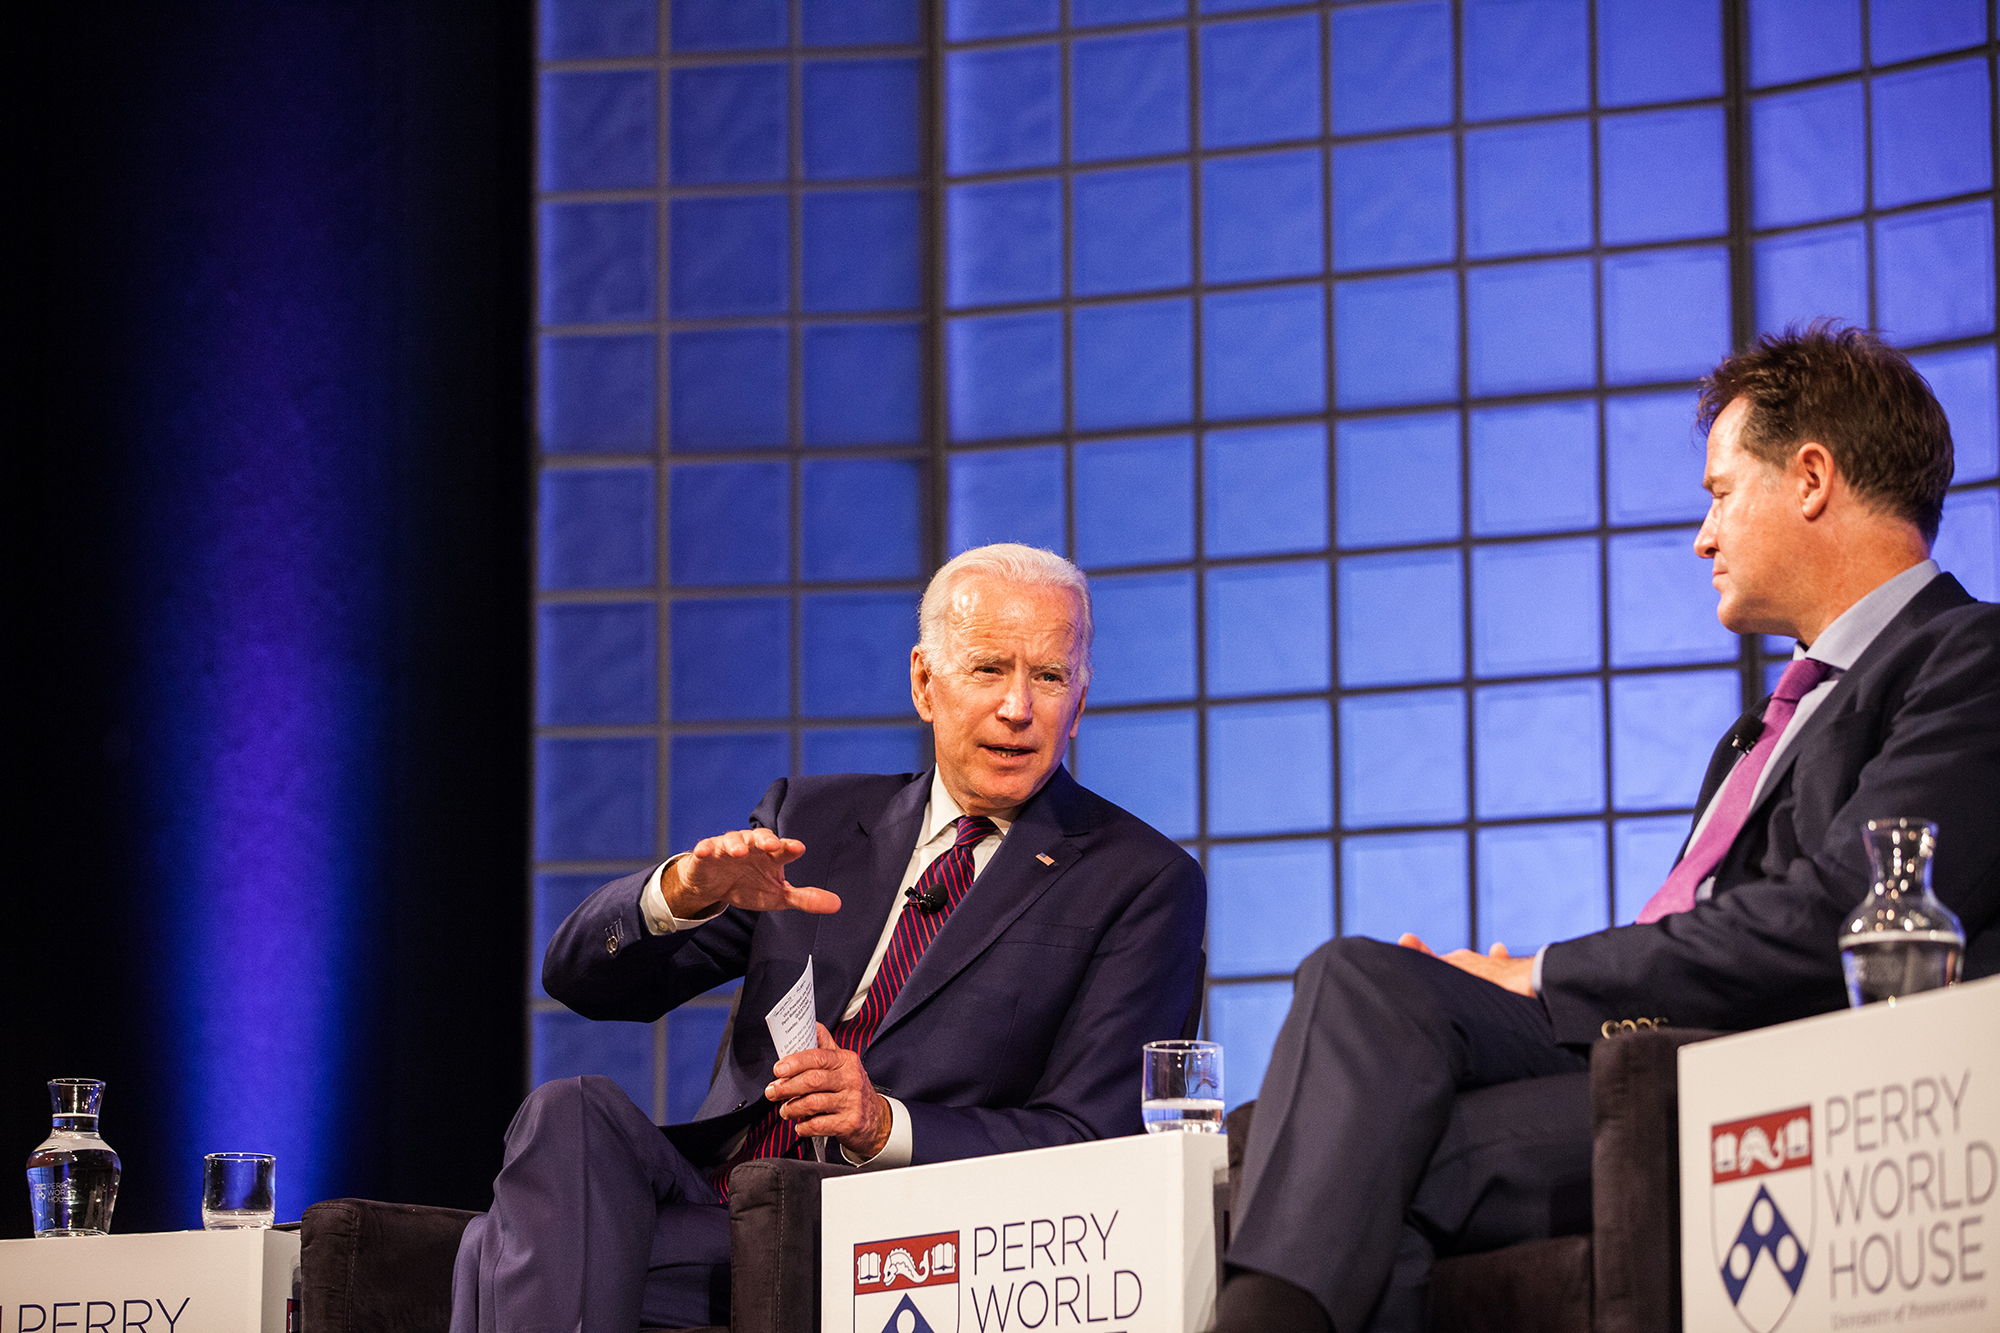 president biden at perry world house event